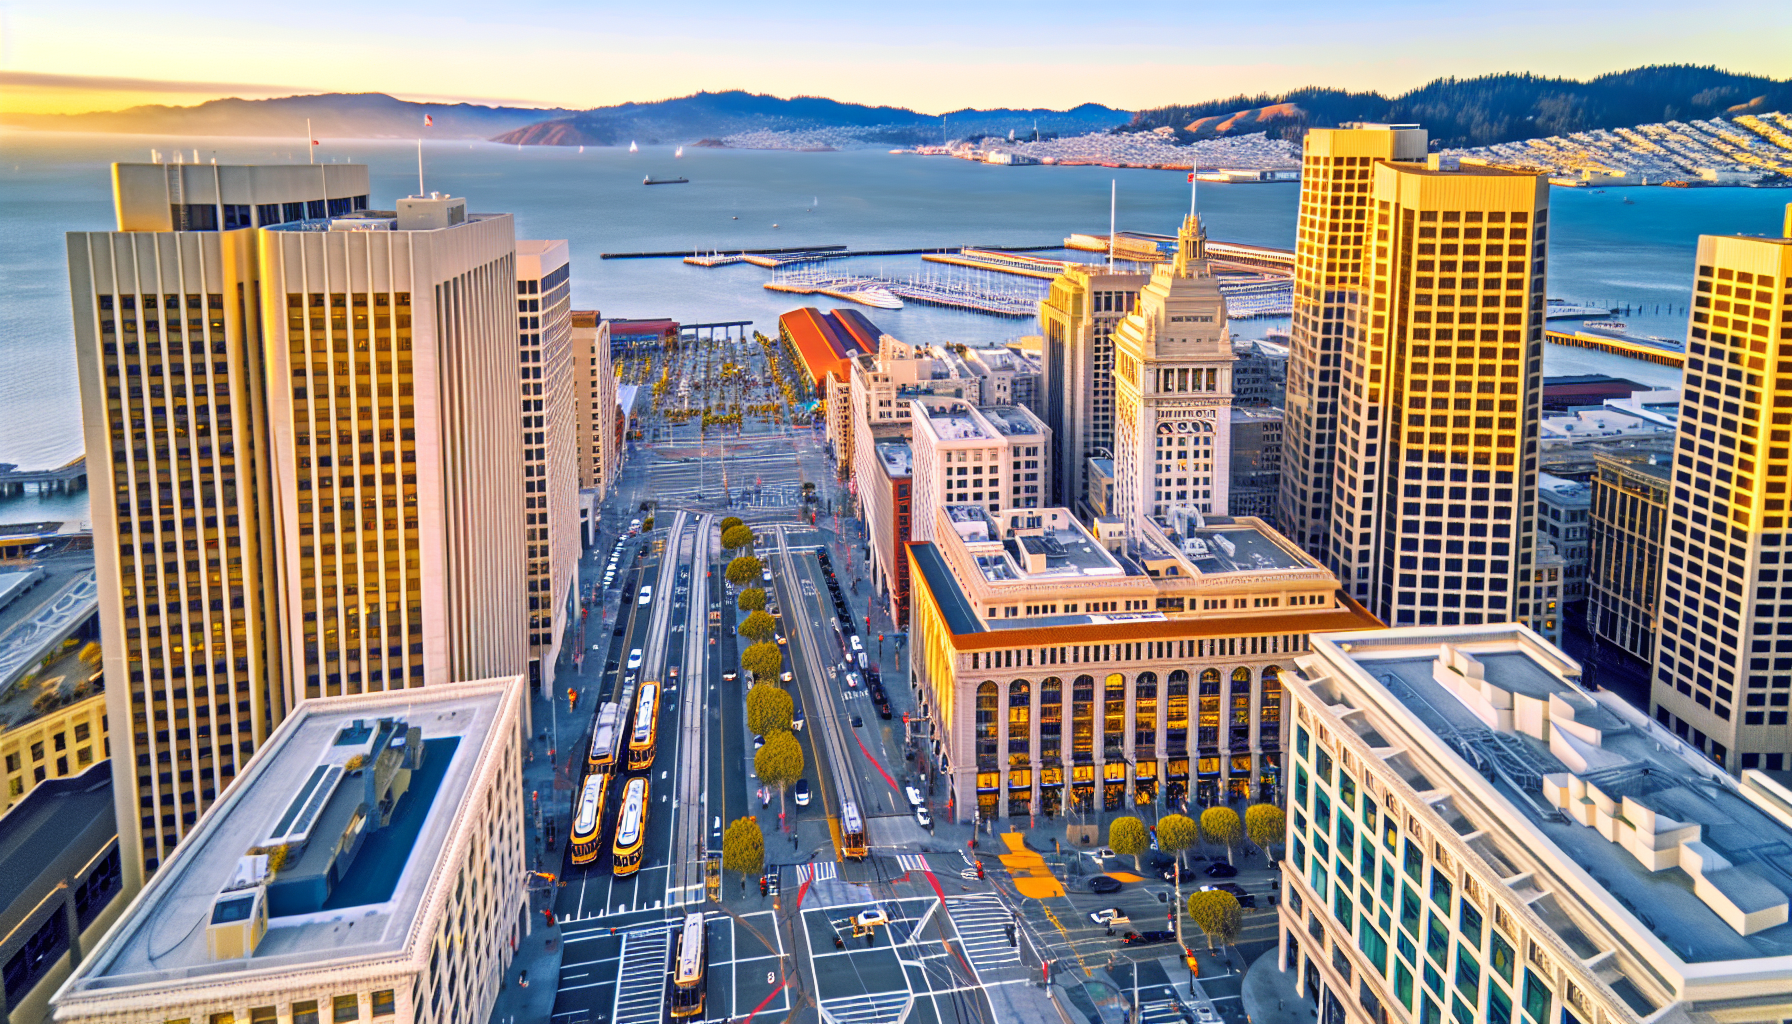 View of Embarcadero district in San Francisco